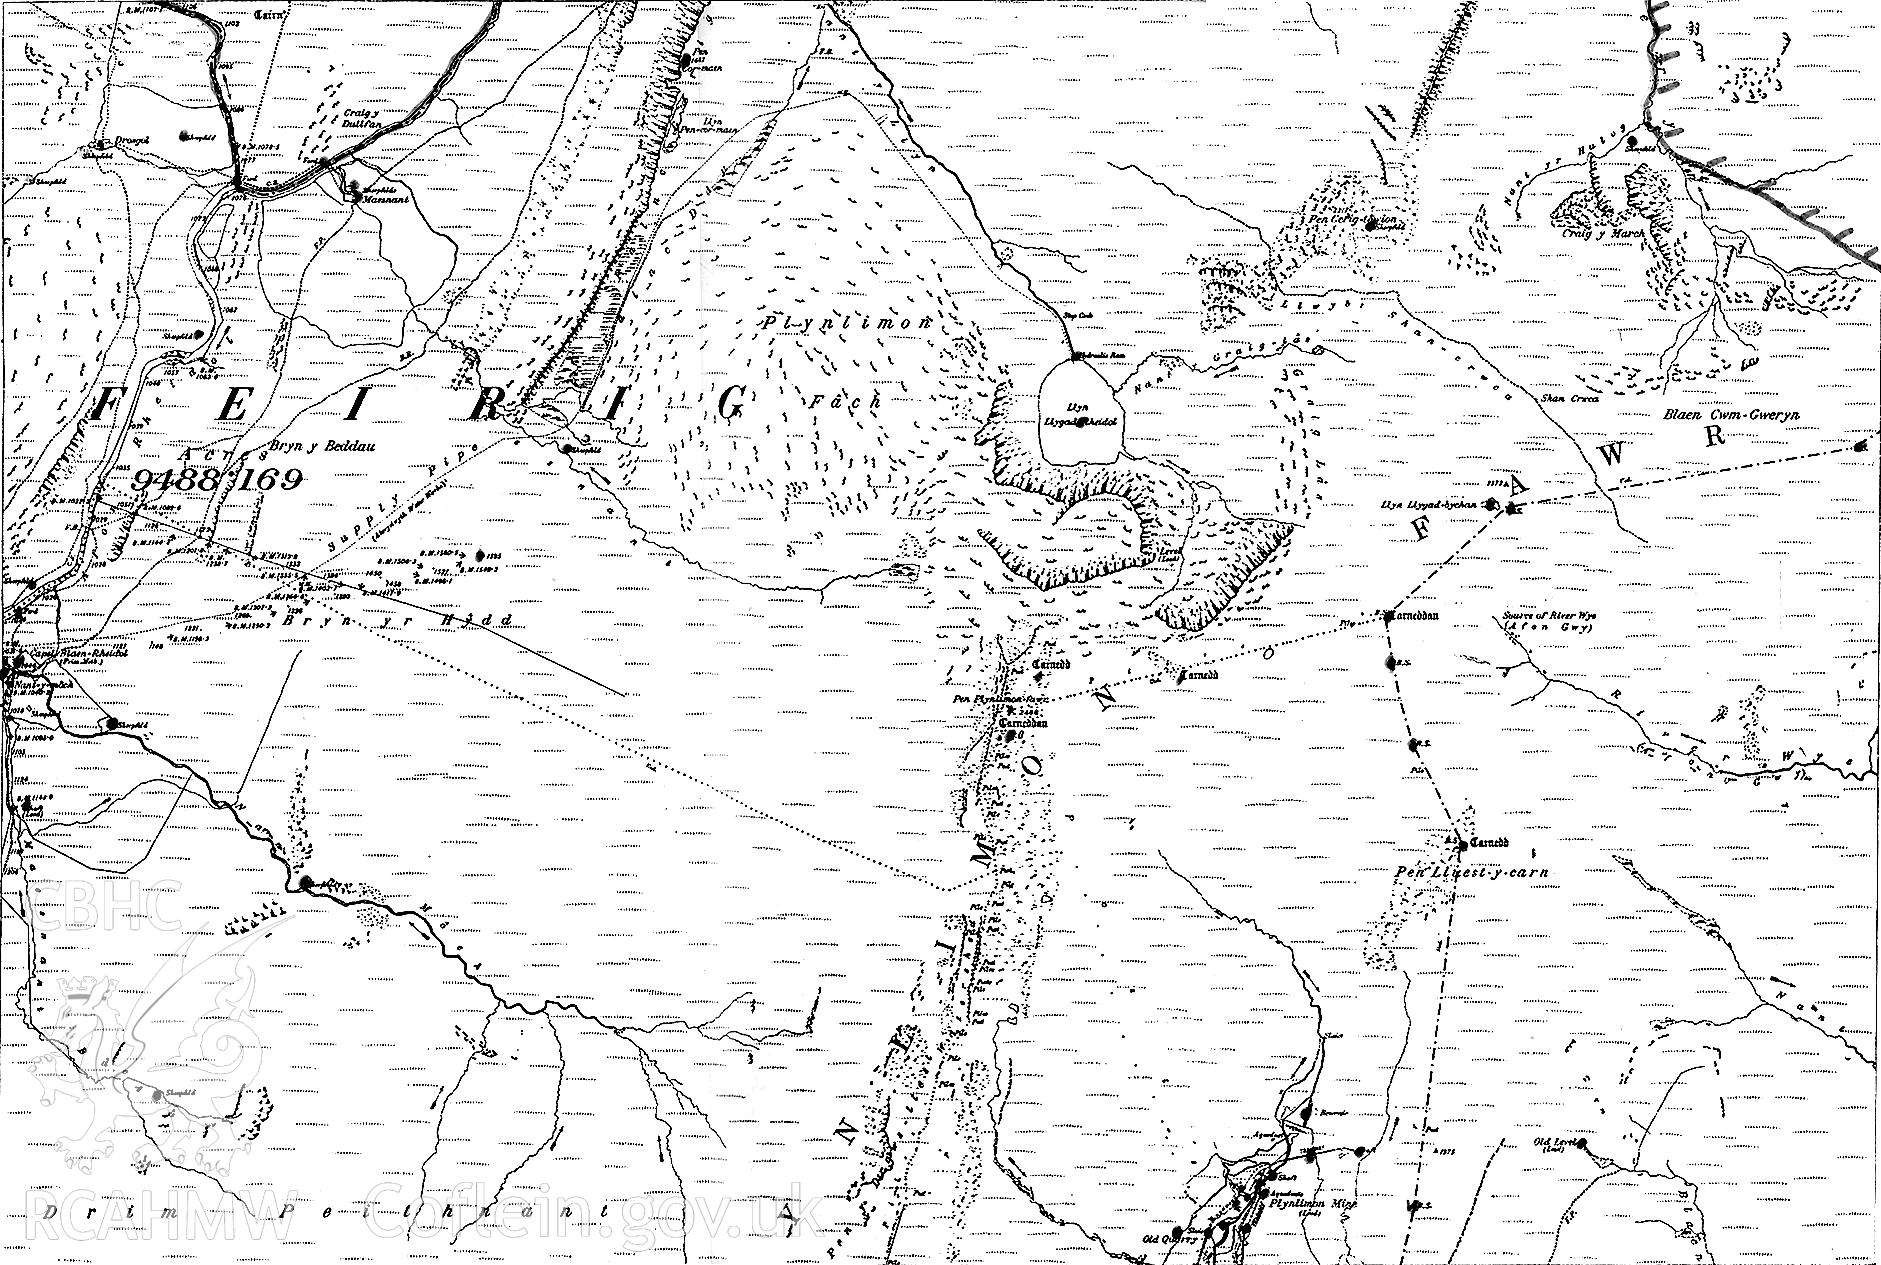 Part of a map showing Plynlimon Fach and the surrounding area. Undated.